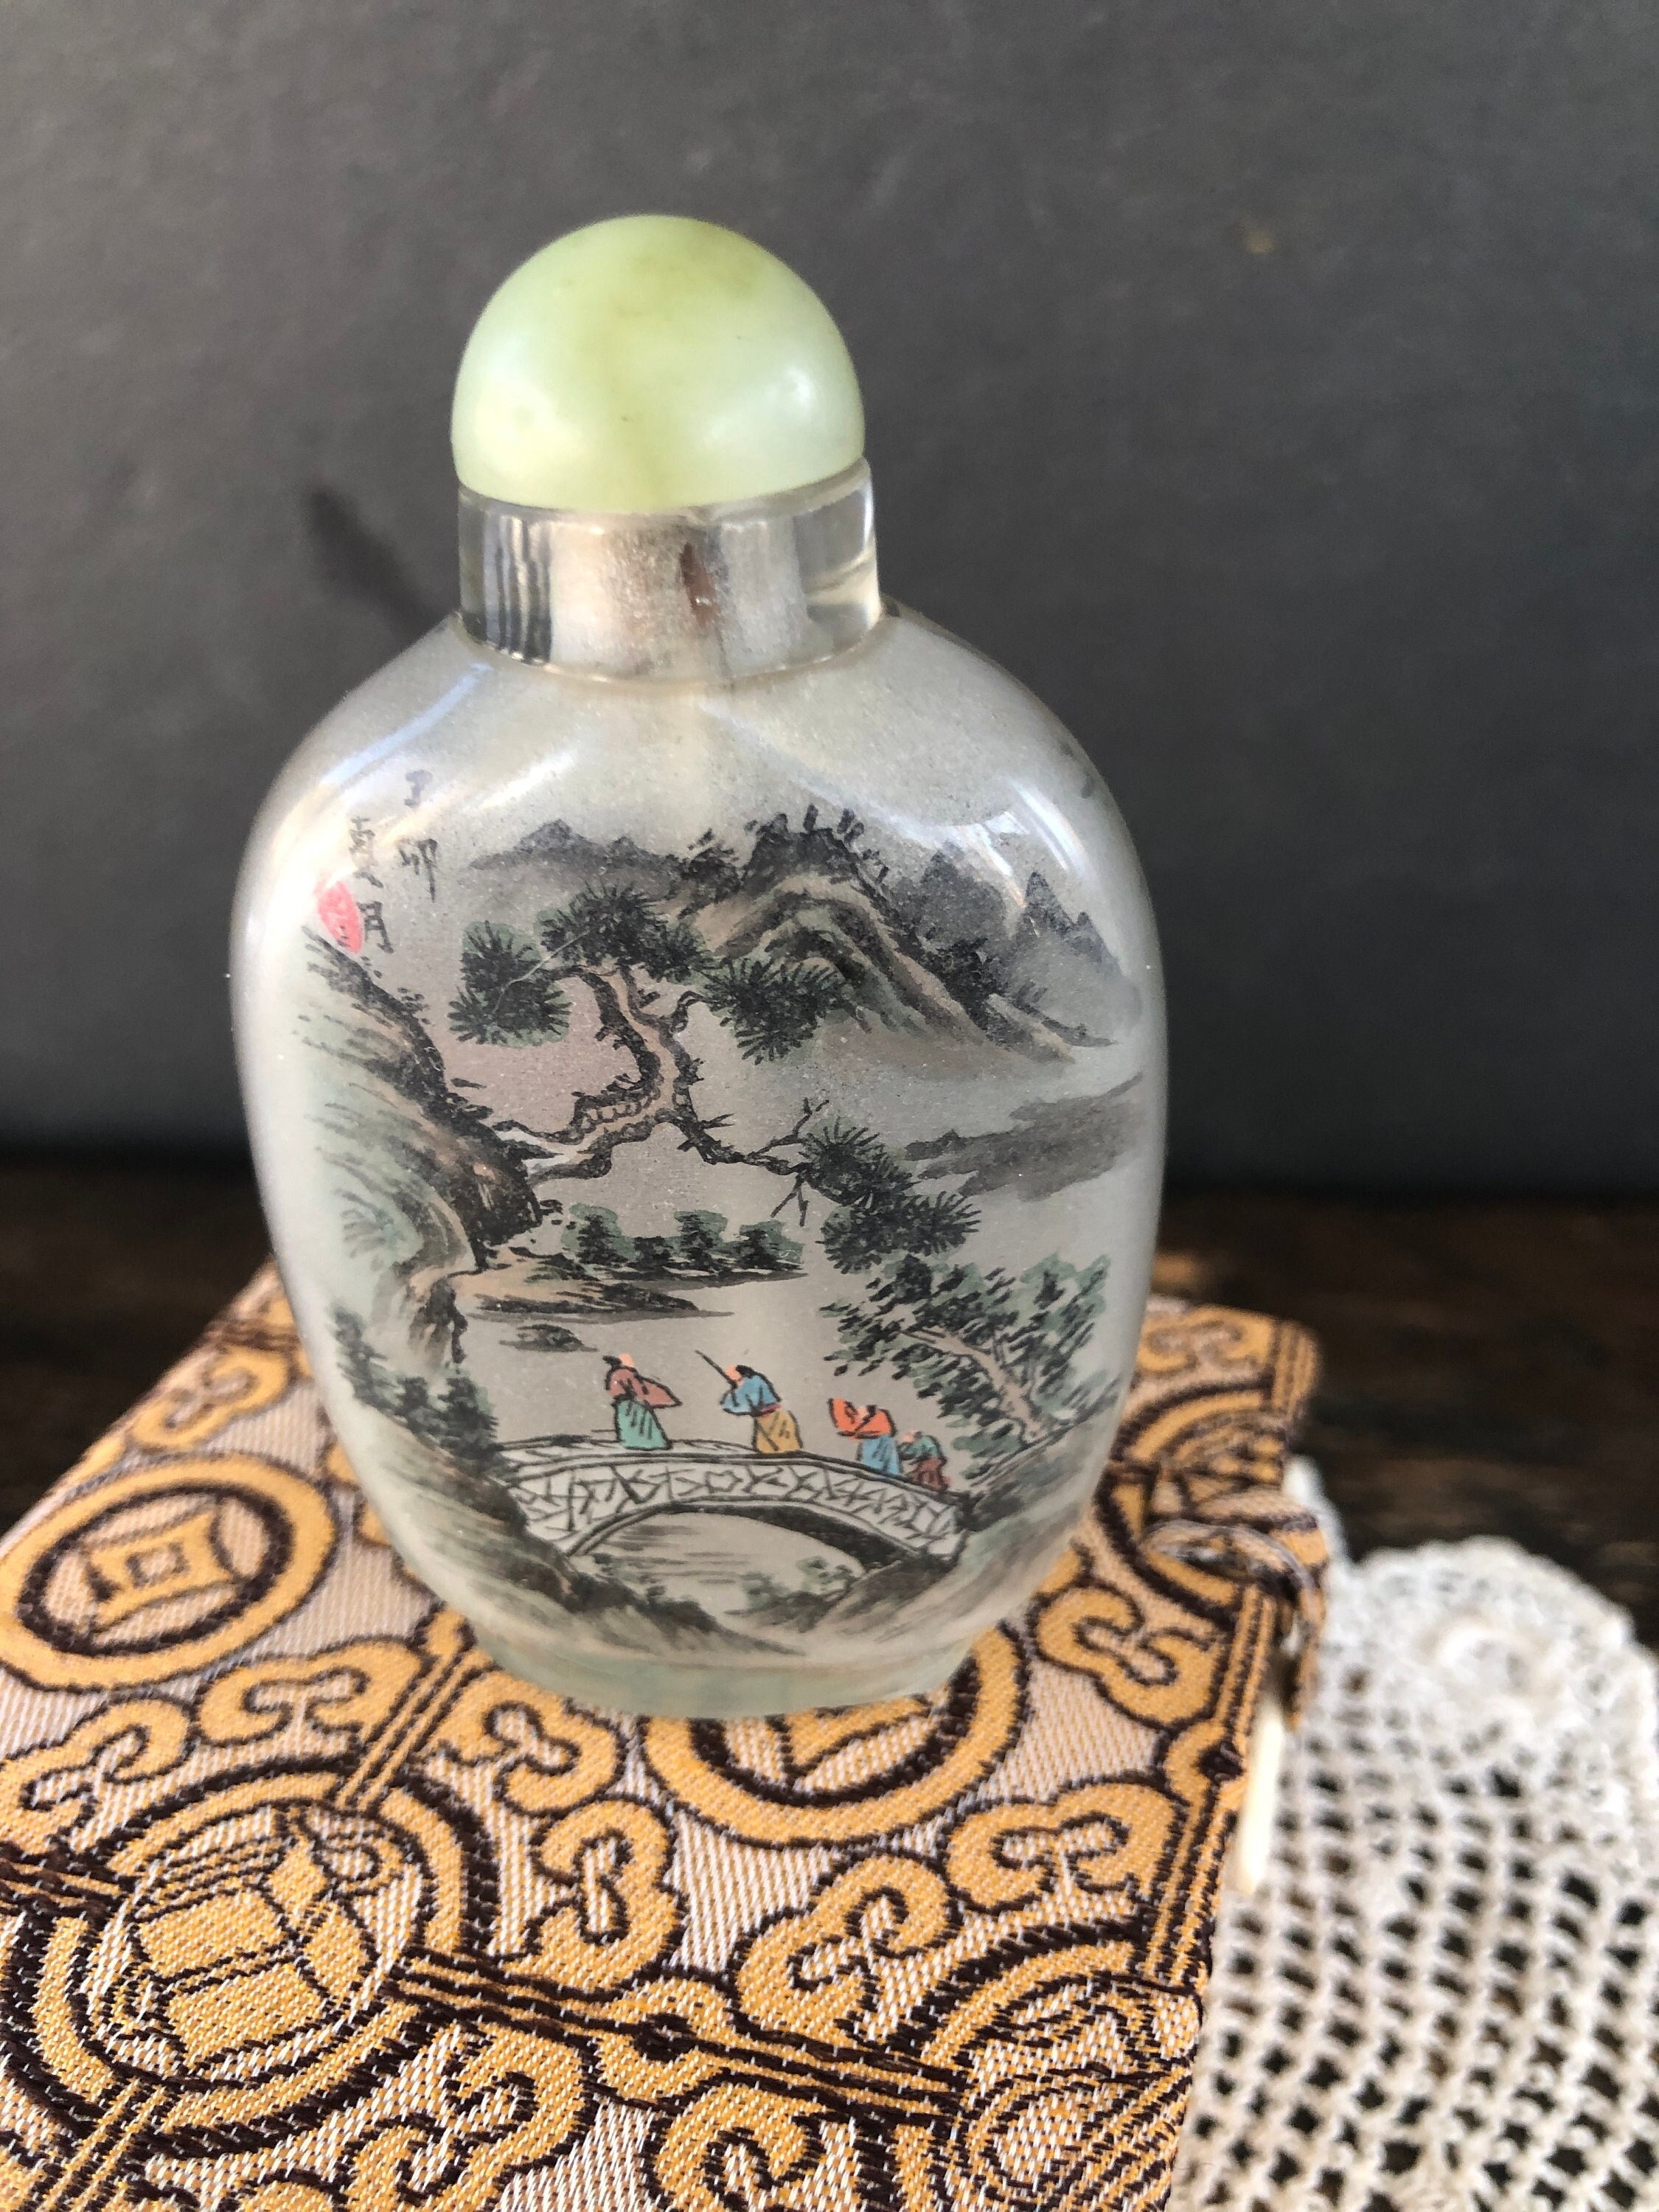 Chinese Inside Painted Snuff Bottle - Birds #62